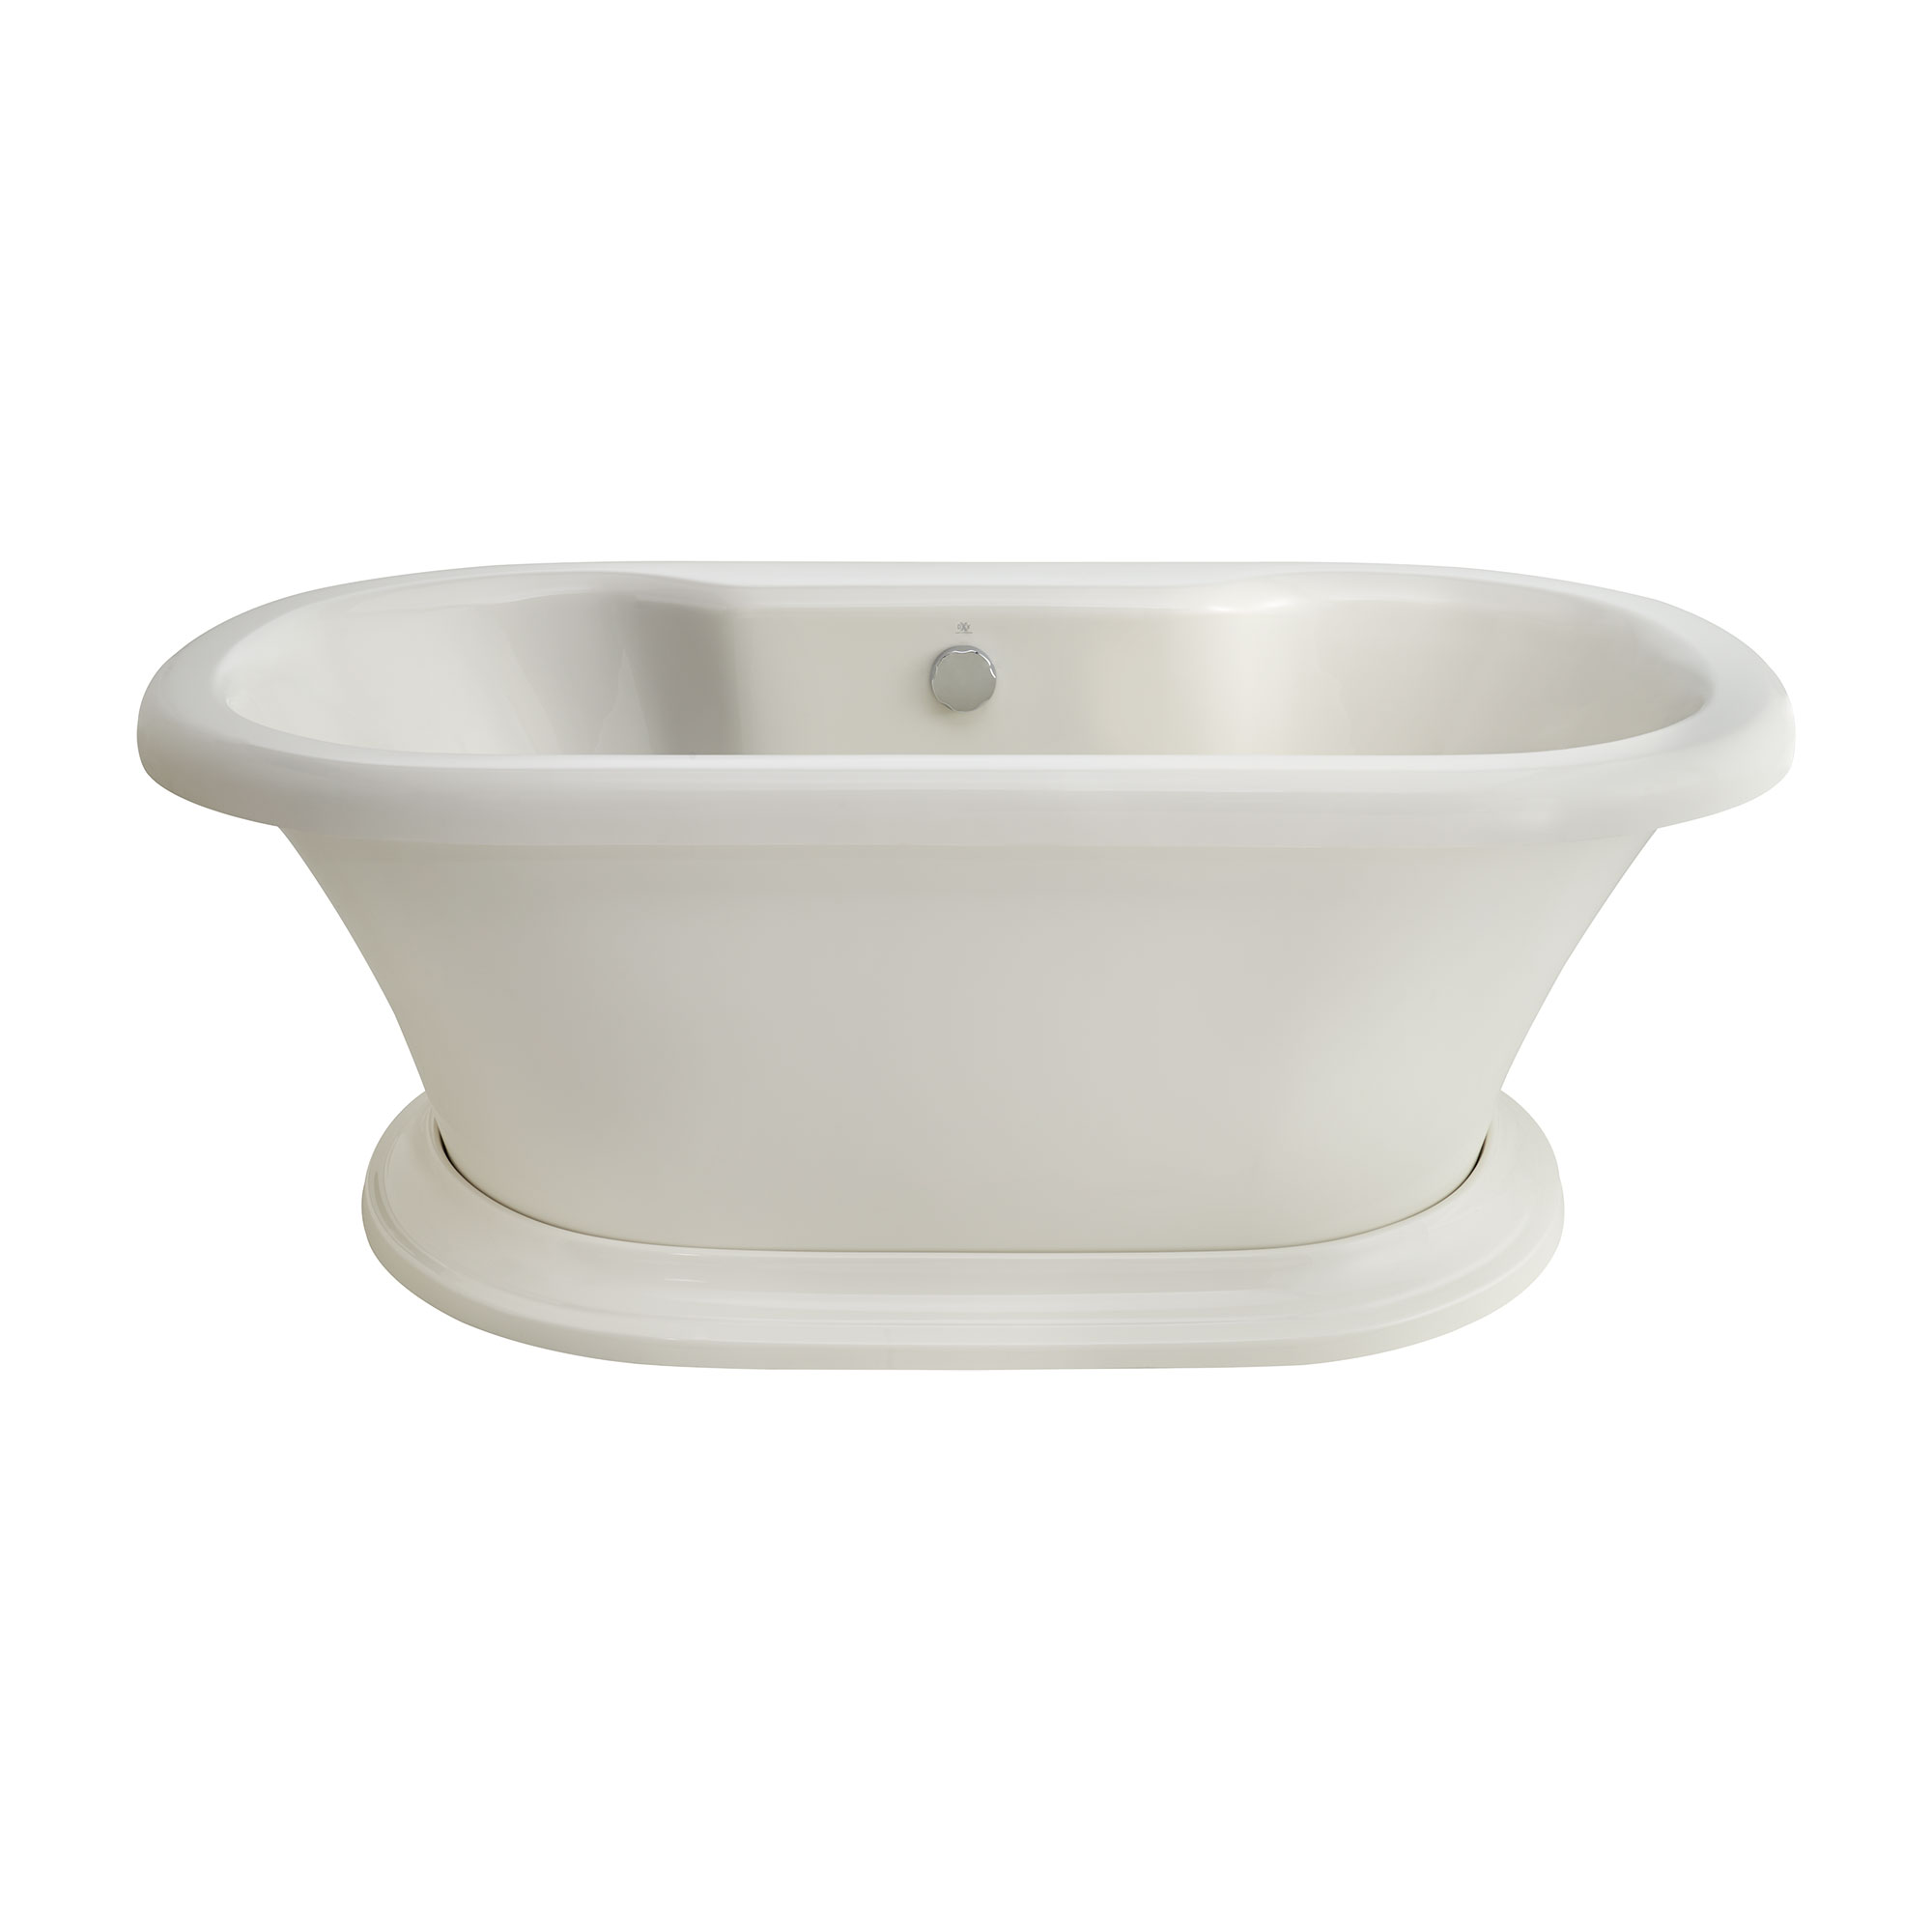 St. George® 66 in. x 36 in. Freestanding Bathtub with Deck